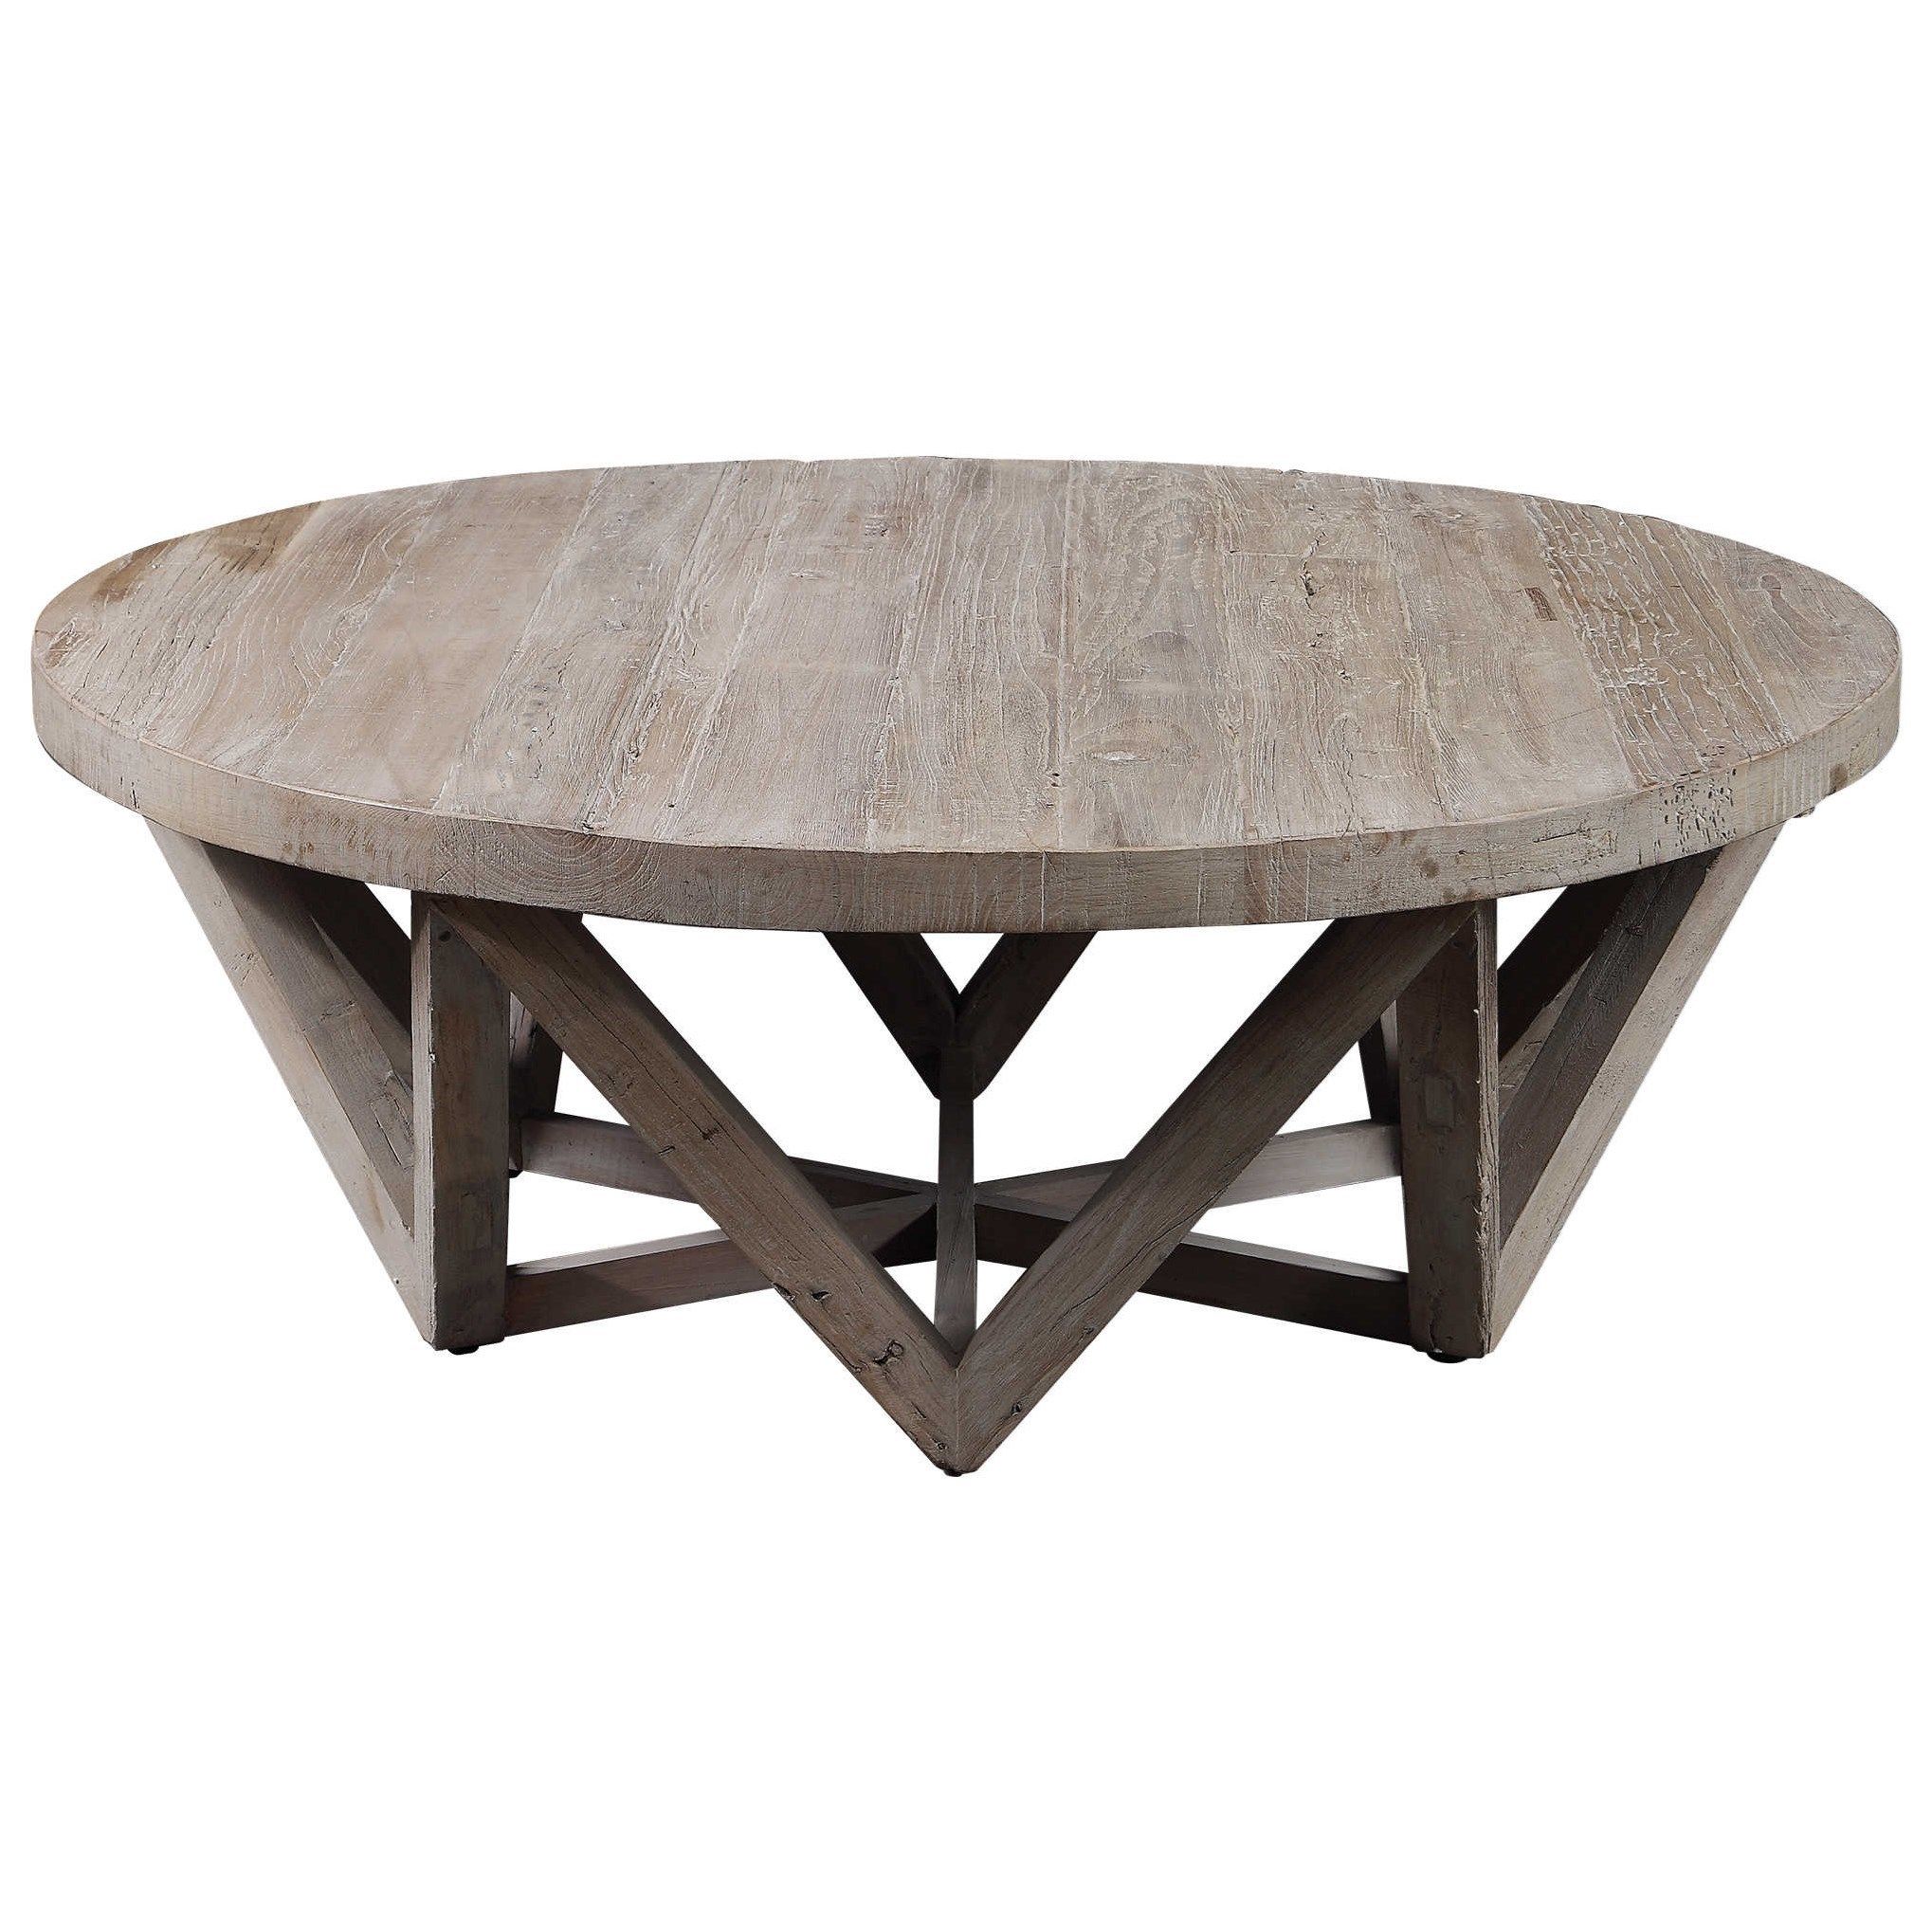 Uttermost Accent Furniture – Occasional Tables Kendry Reclaimed Wood Inside Occasional Coffee Tables (View 9 of 15)